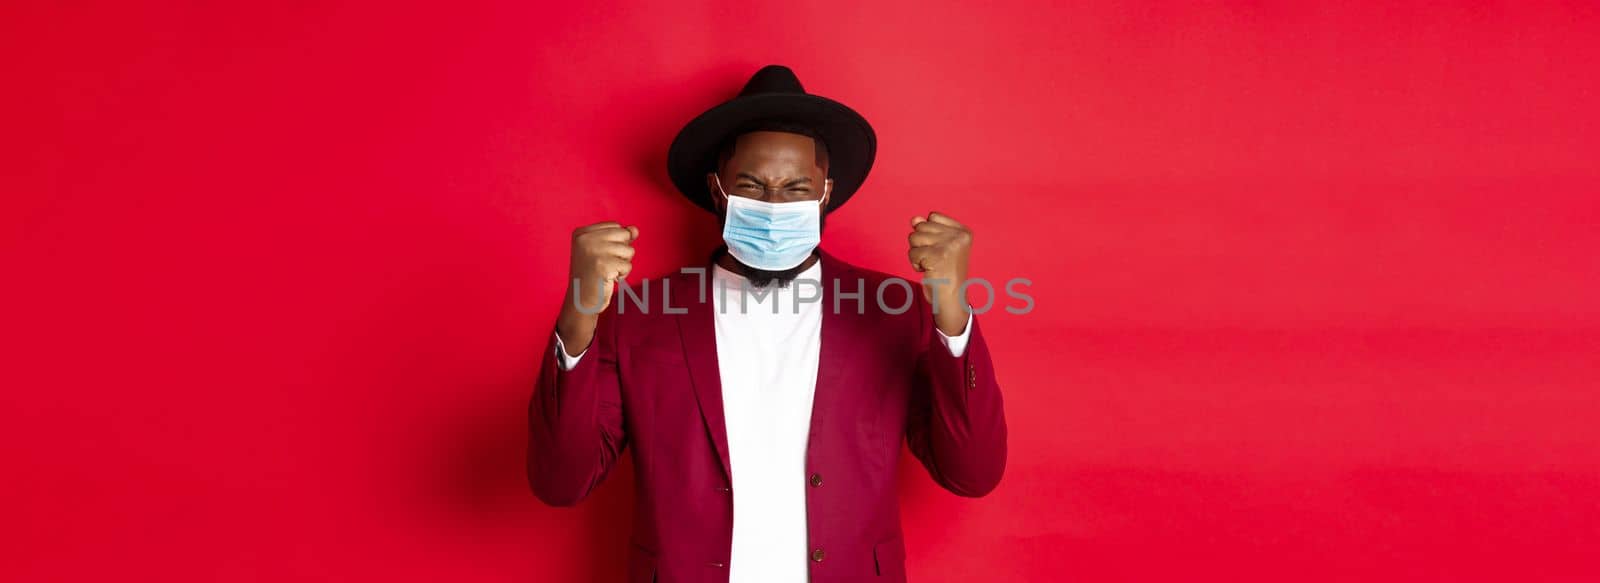 Covid-19, quarantine and holidays concept. Cheerful african american man showing clenched fist and rejoicing of winning, achieve goal, wearing medical mask from coronavirus.